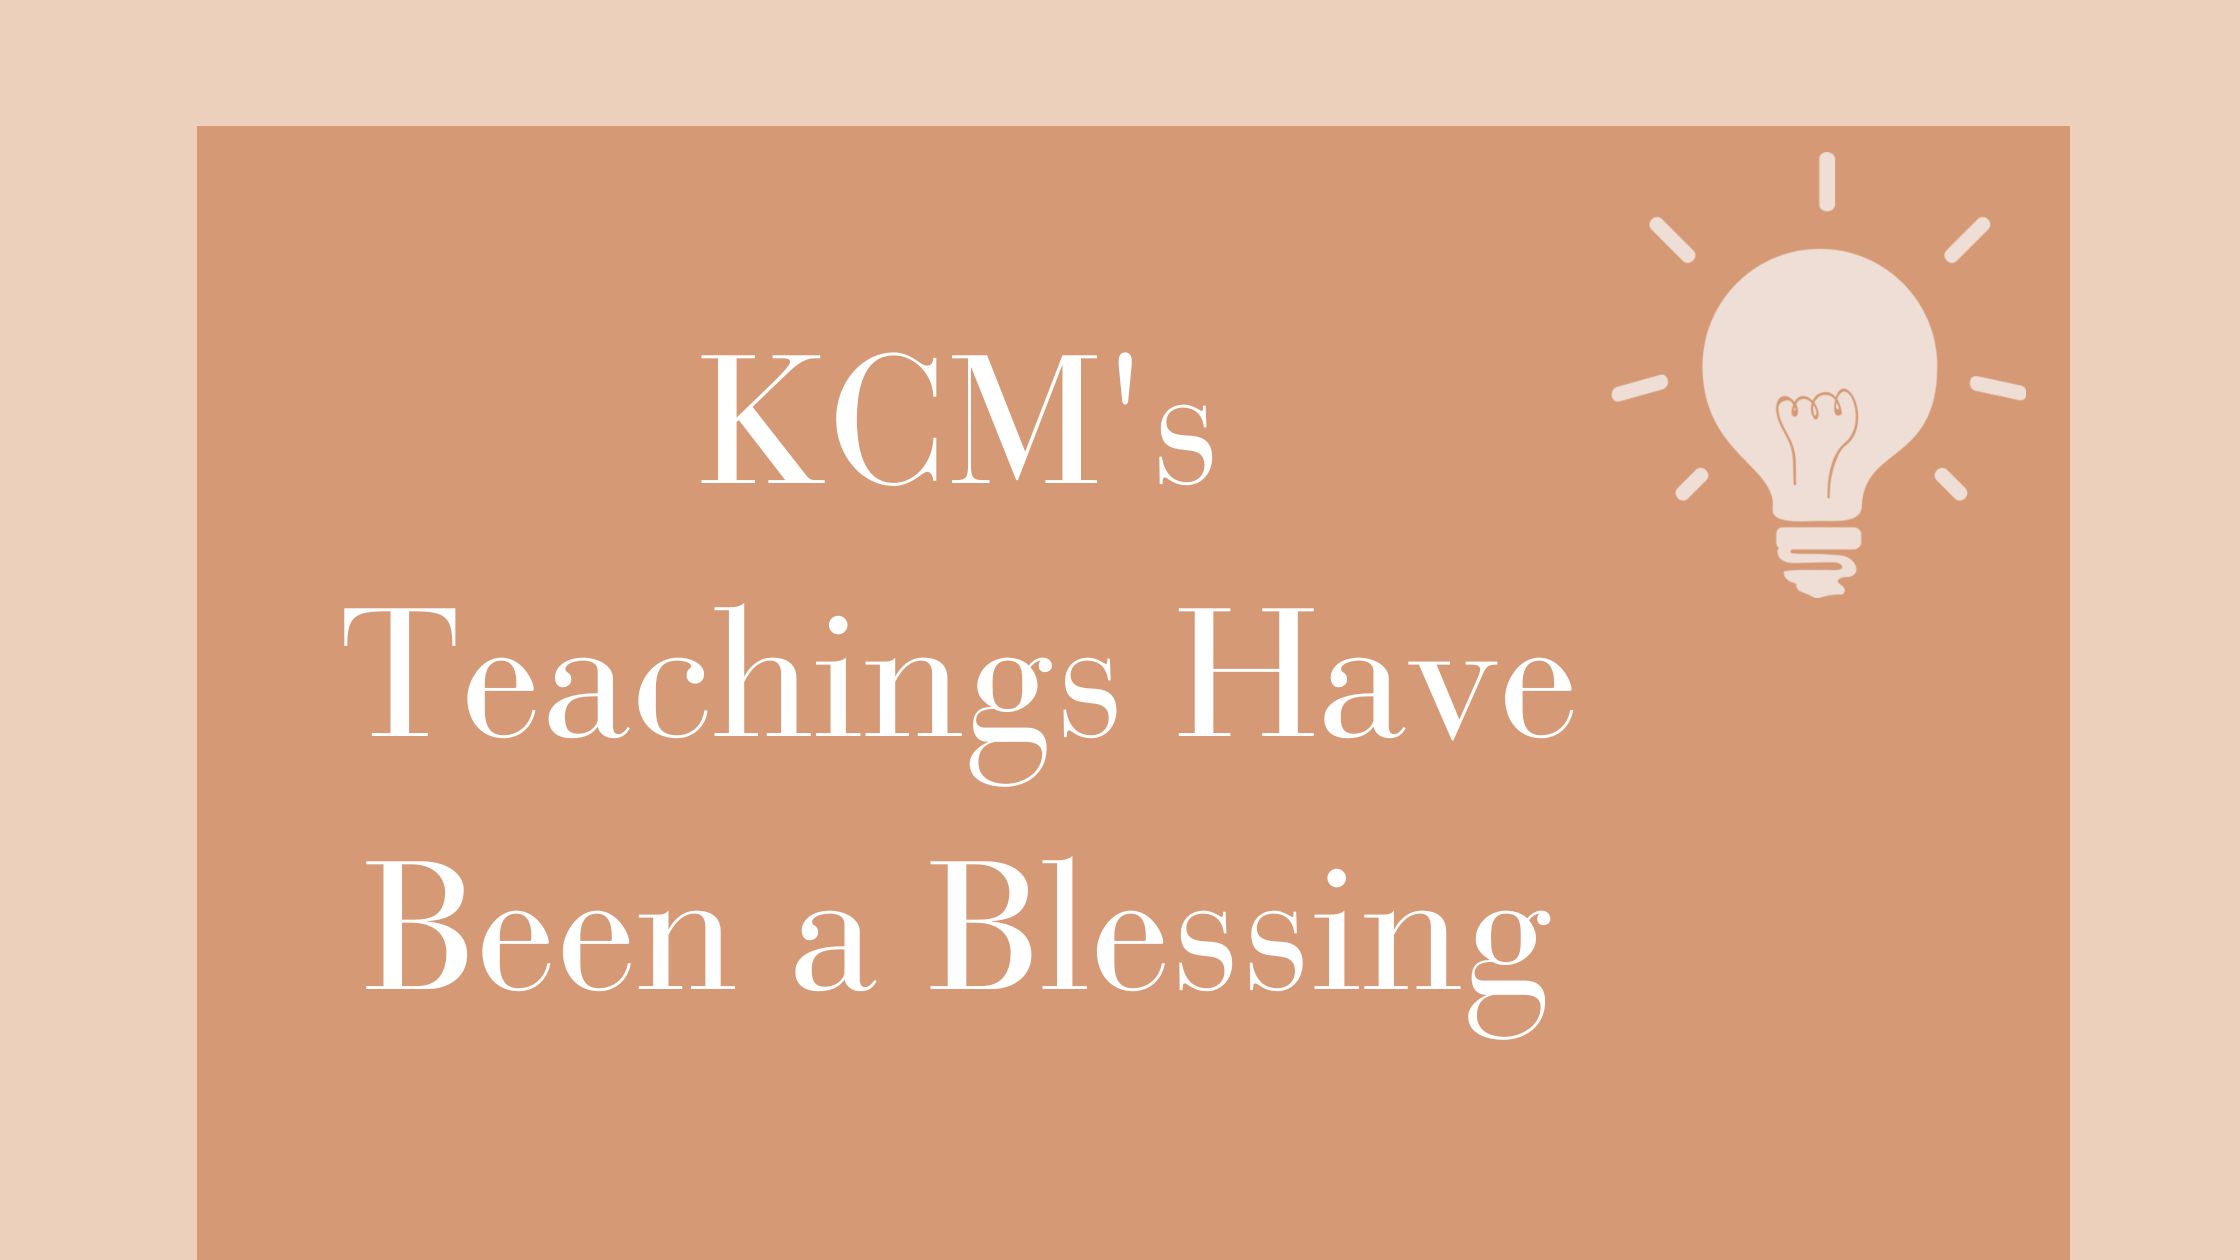 Teachings are a blessing - Testimony